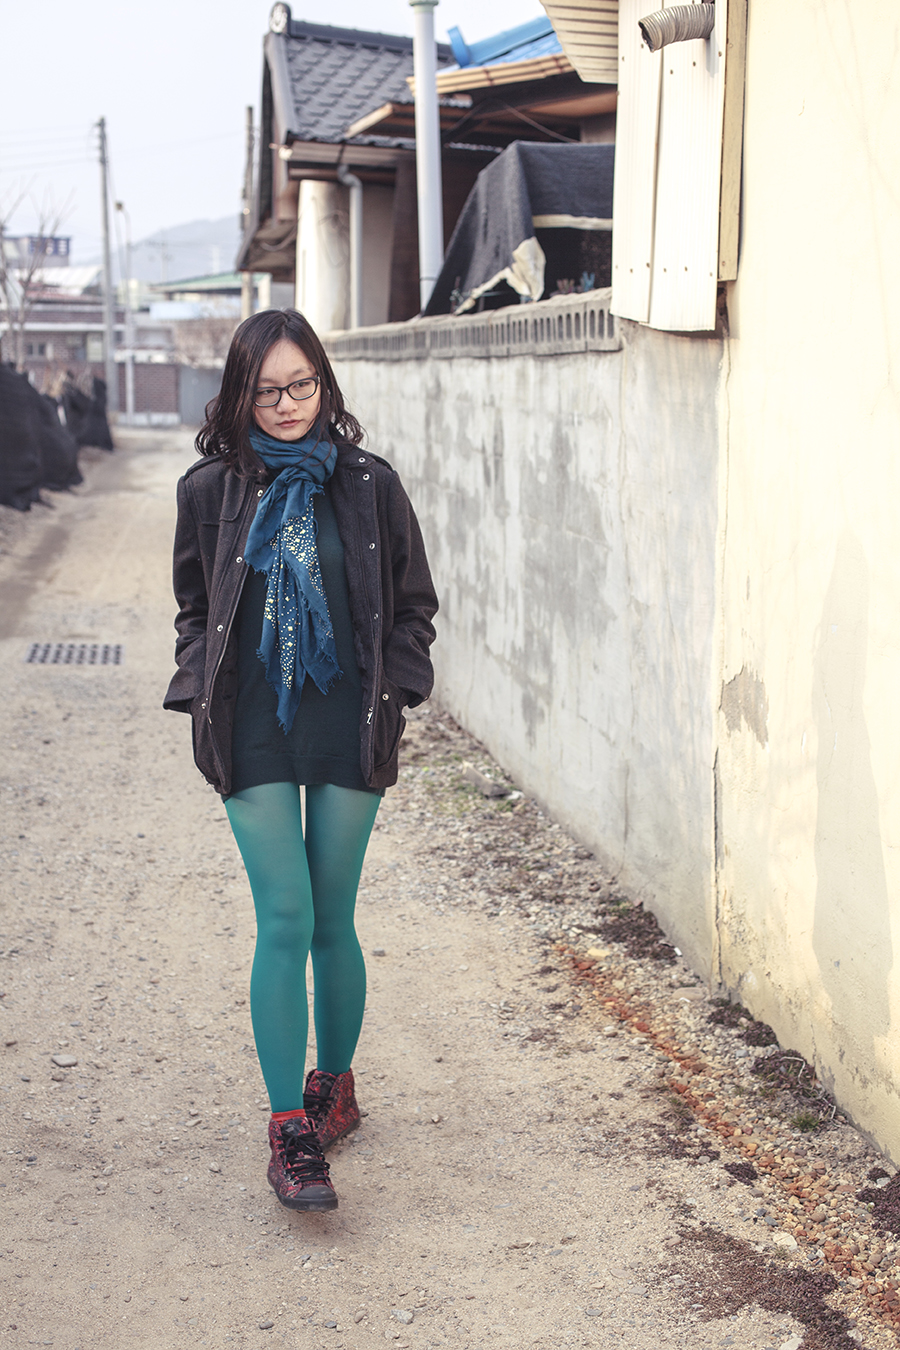 Outfit in green: H&M merino wool sweater in green, Marshalls blue shawl with gold studs, teal tights, H&M men's jacket, black rimmed Gap glasses, Twisted Sisters eye motif Caren Bracelet via Zalora, Alexander McQueen x Puma high top sneakers.